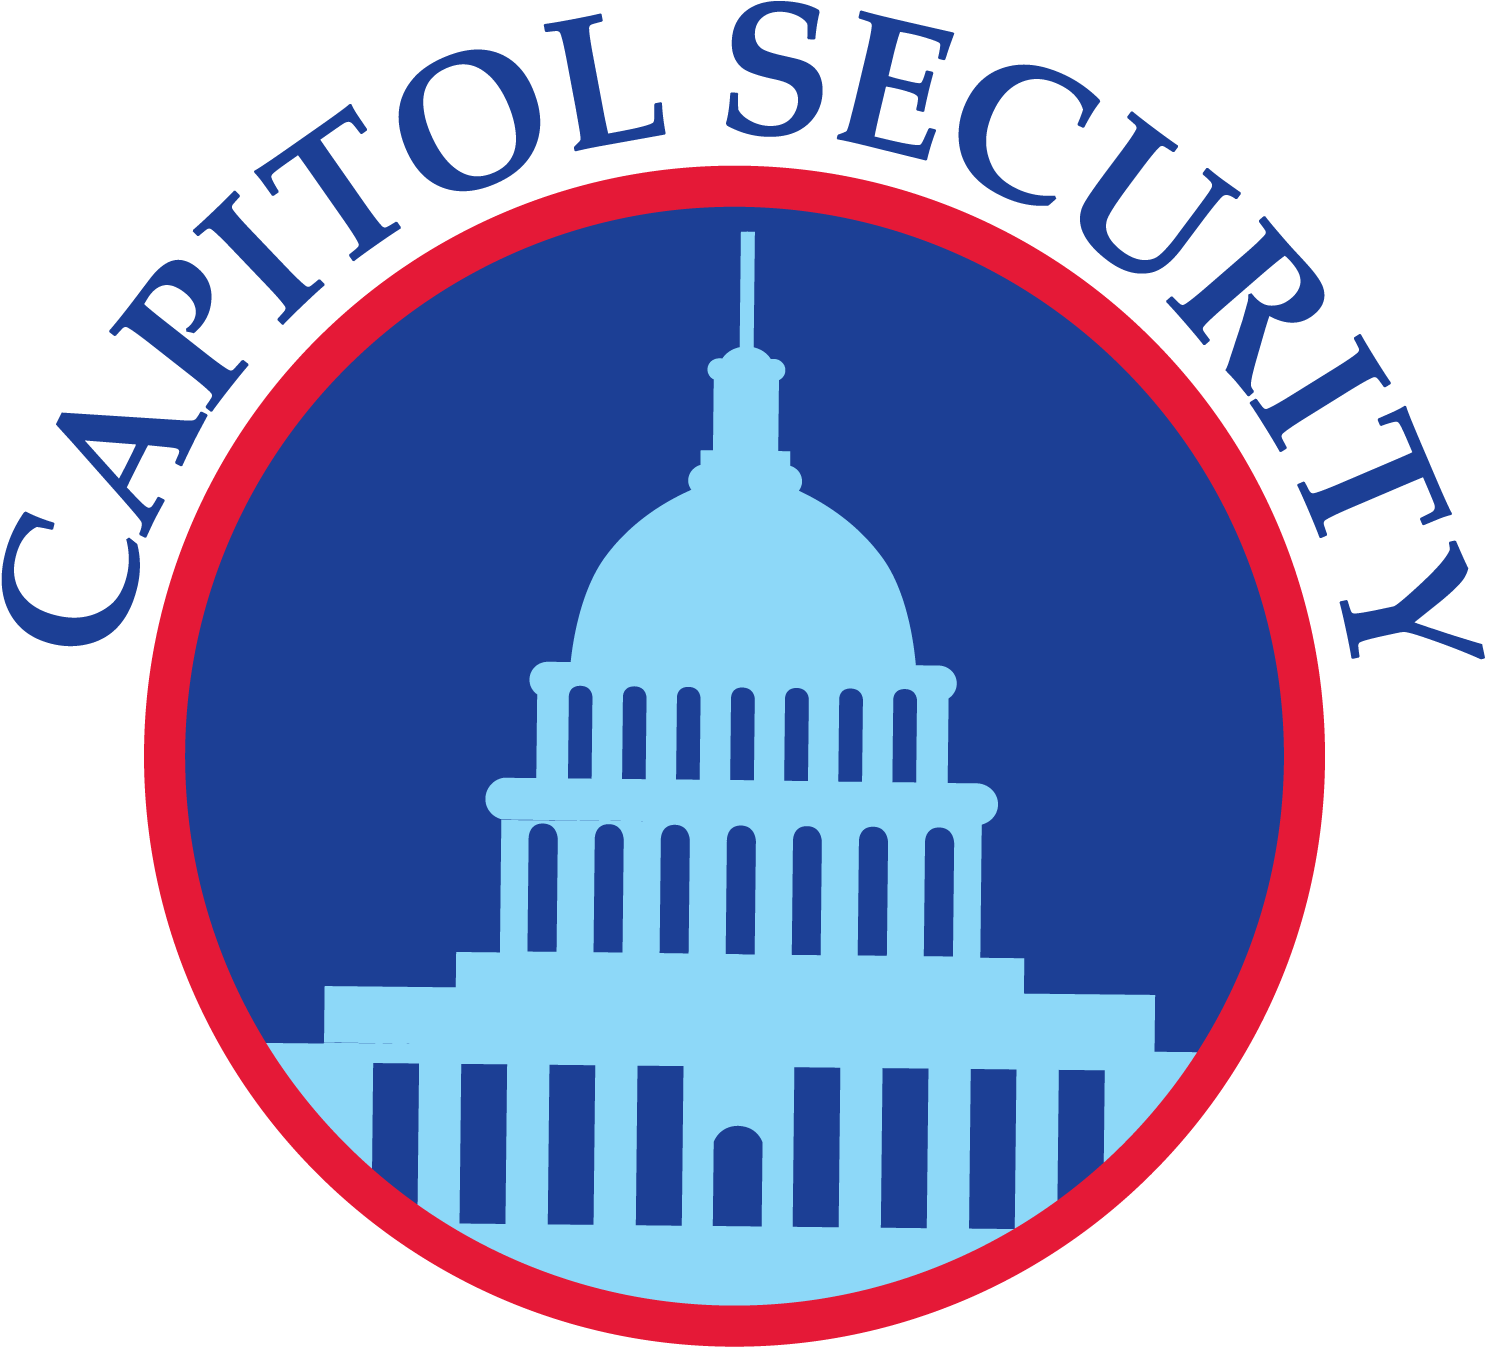 It Company Logo Design For Capitol Security Systems - Relief Society Logo 2018 (1500x1353)